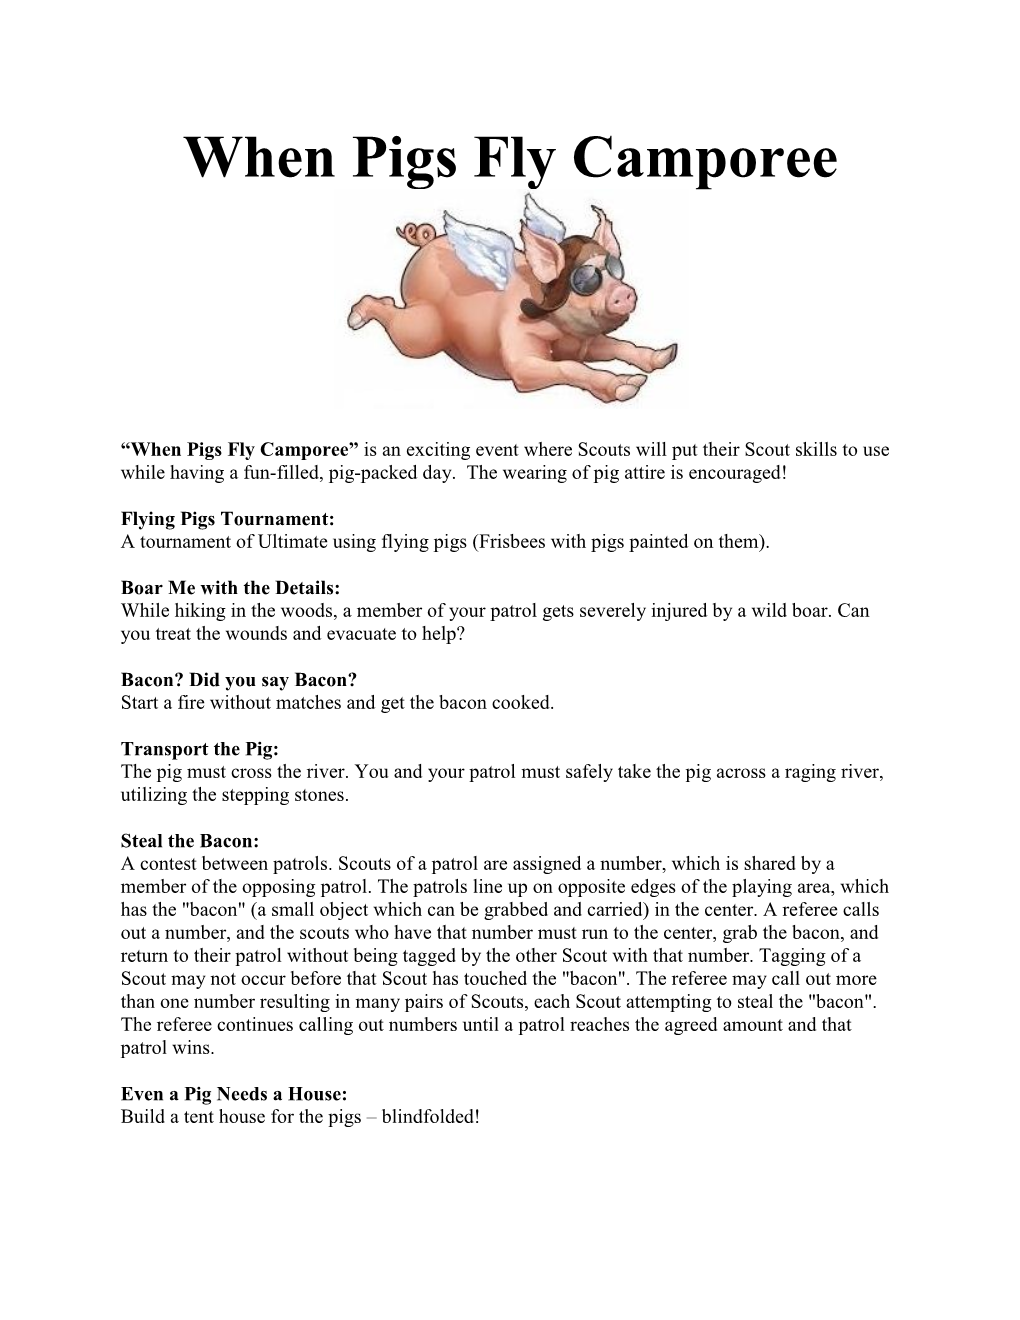 When Pigs Fly Camporee